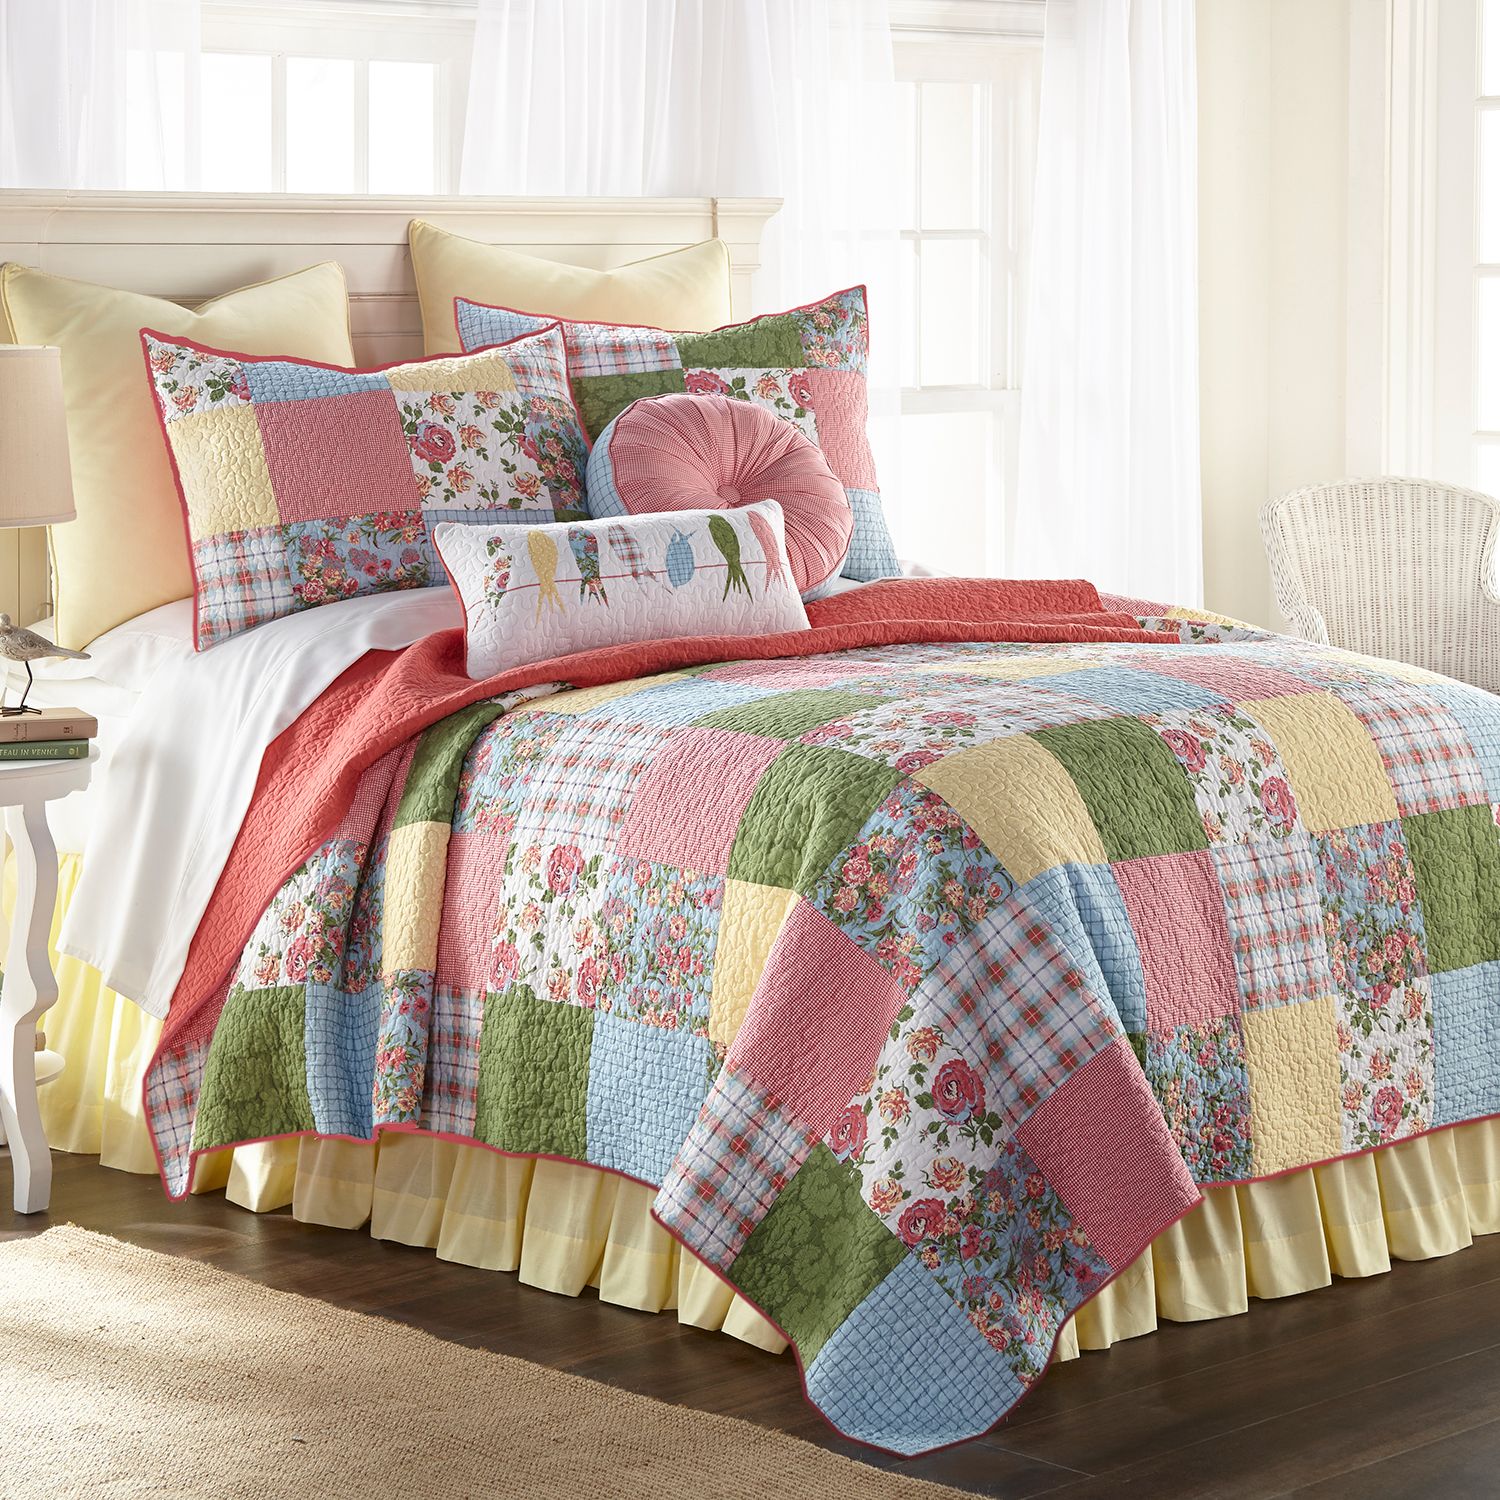 Image for Donna Sharp Sunny Patch Quilt or Sham at Kohl's.